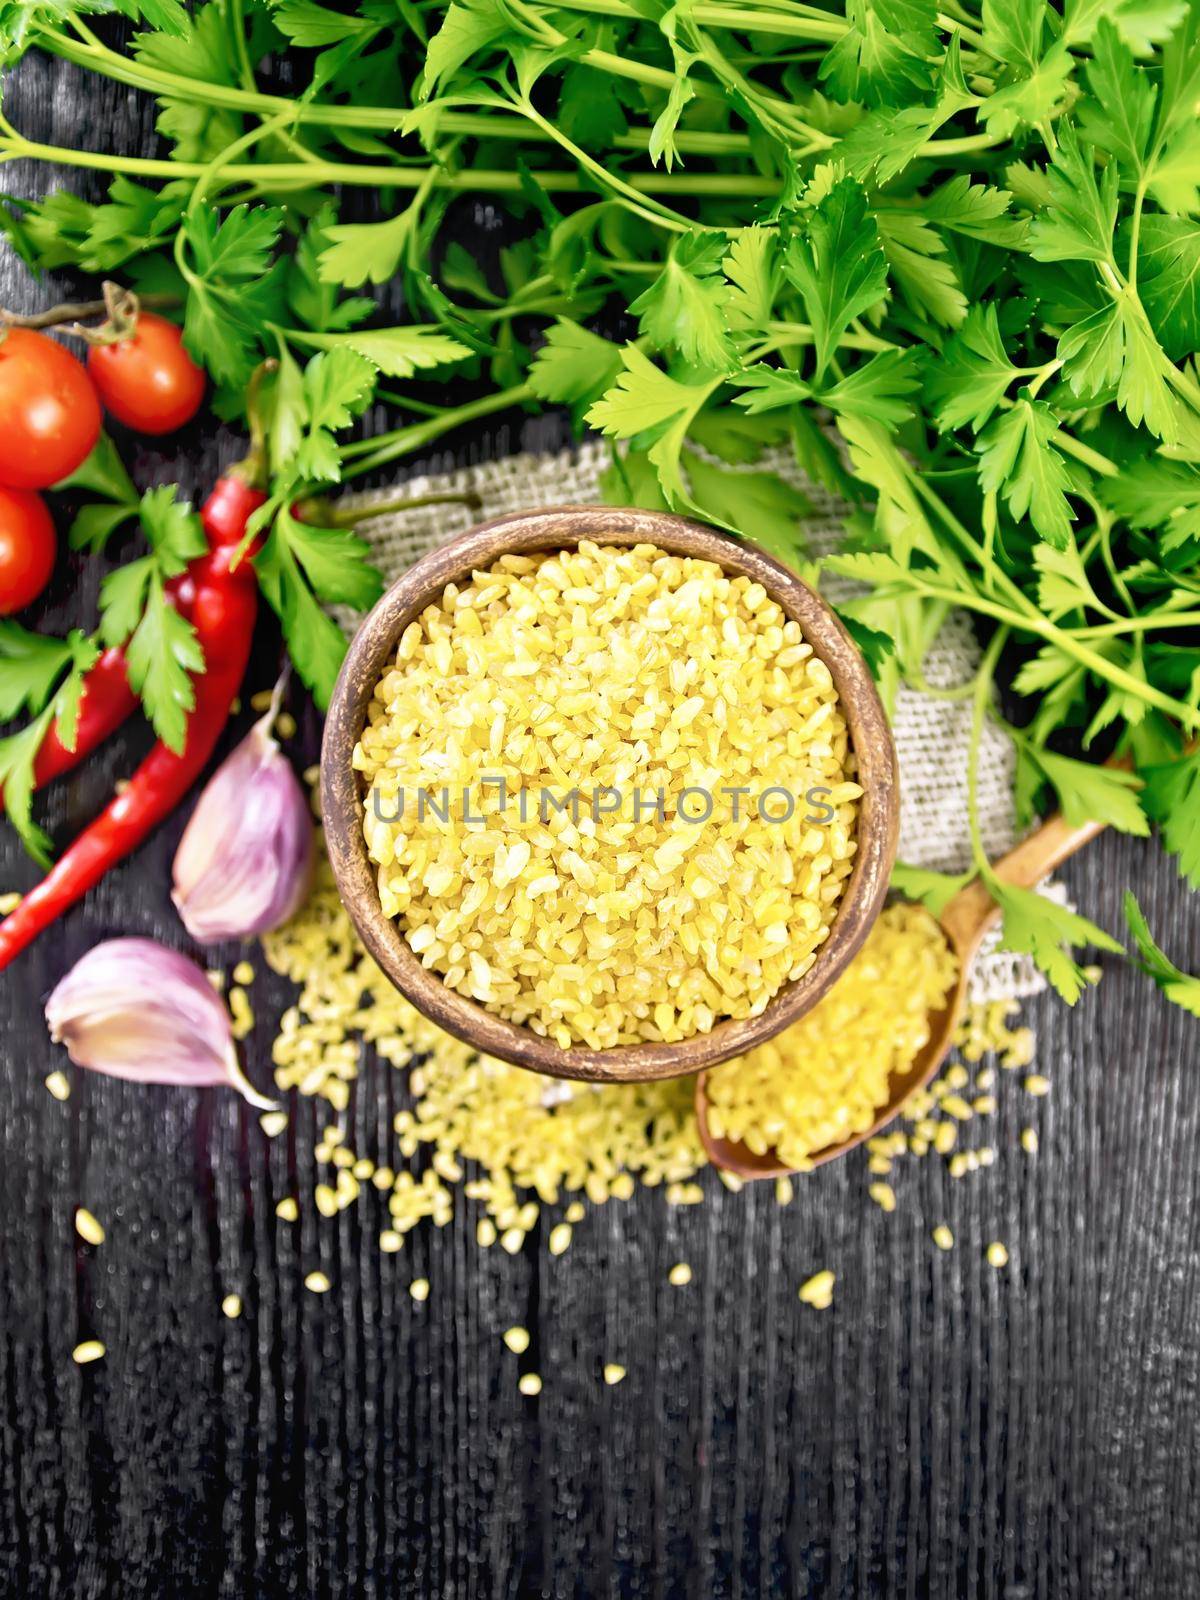 Bulgur groats - steamed wheat grains - in a clay bowl and spoon on sacking, tomatoes, hot peppers, garlic and parsley on wooden board background from above